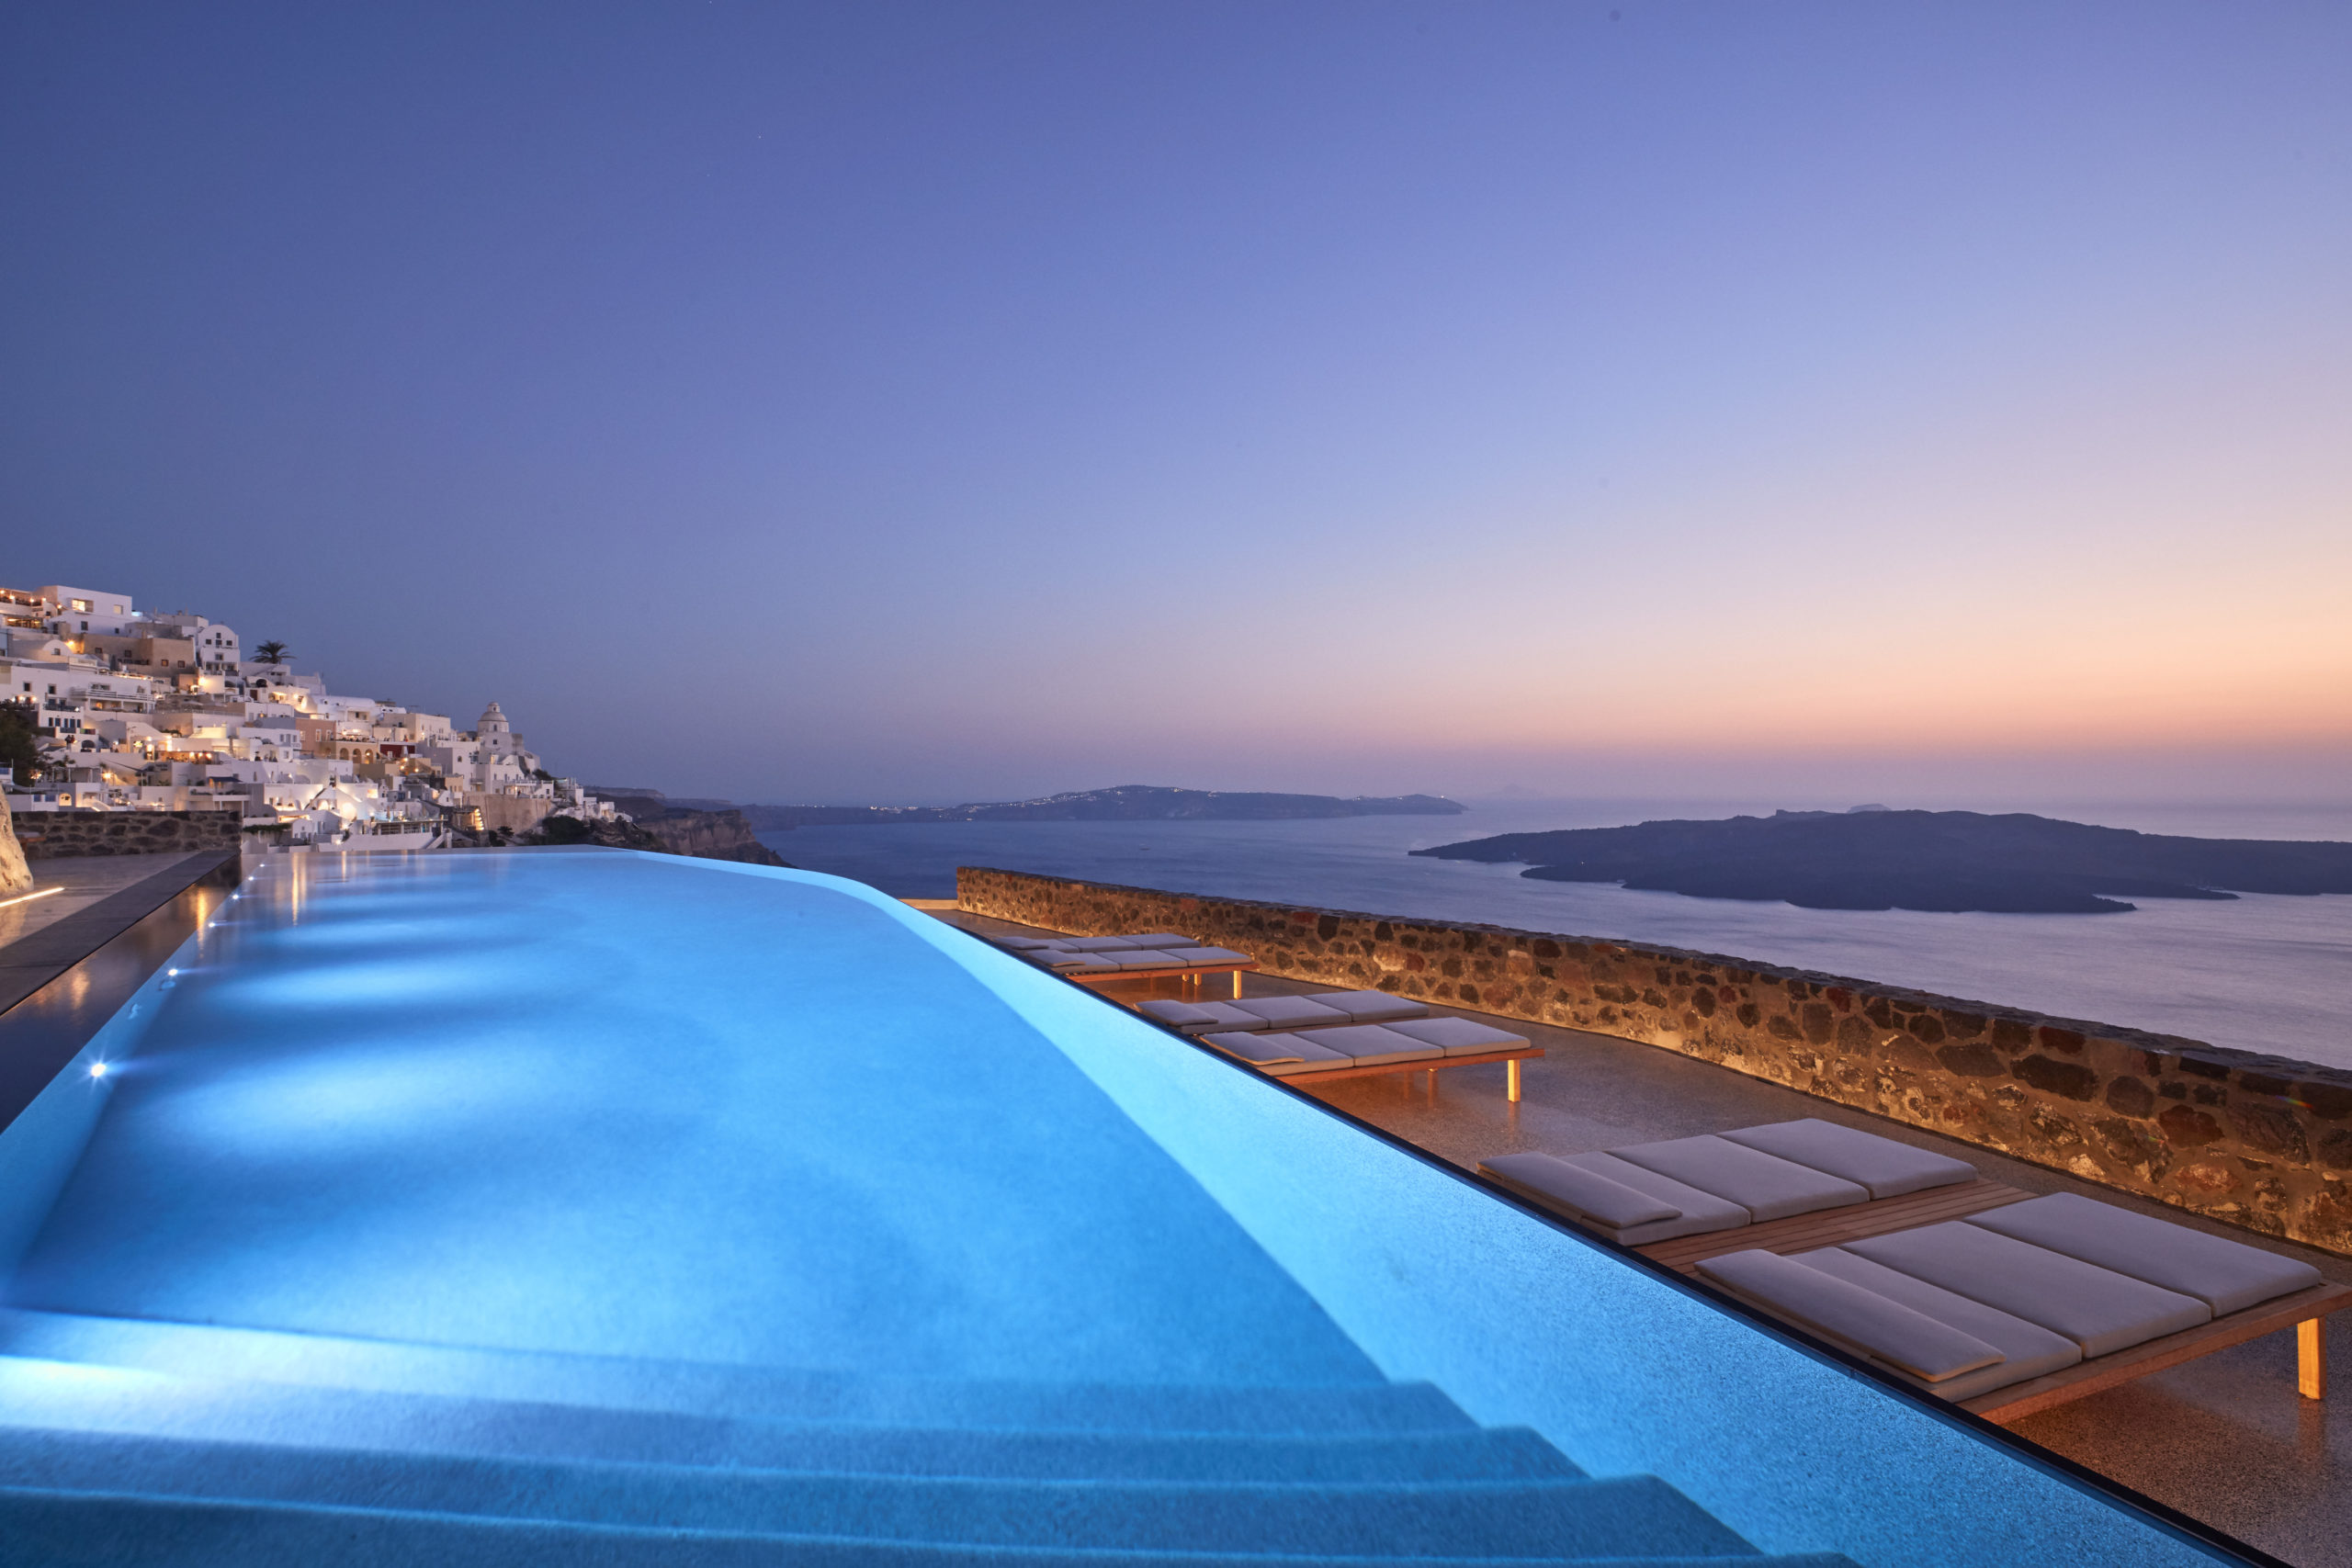 Stunning Sunset and Sea views from the Villa Bordeaux Hotel in Santorini